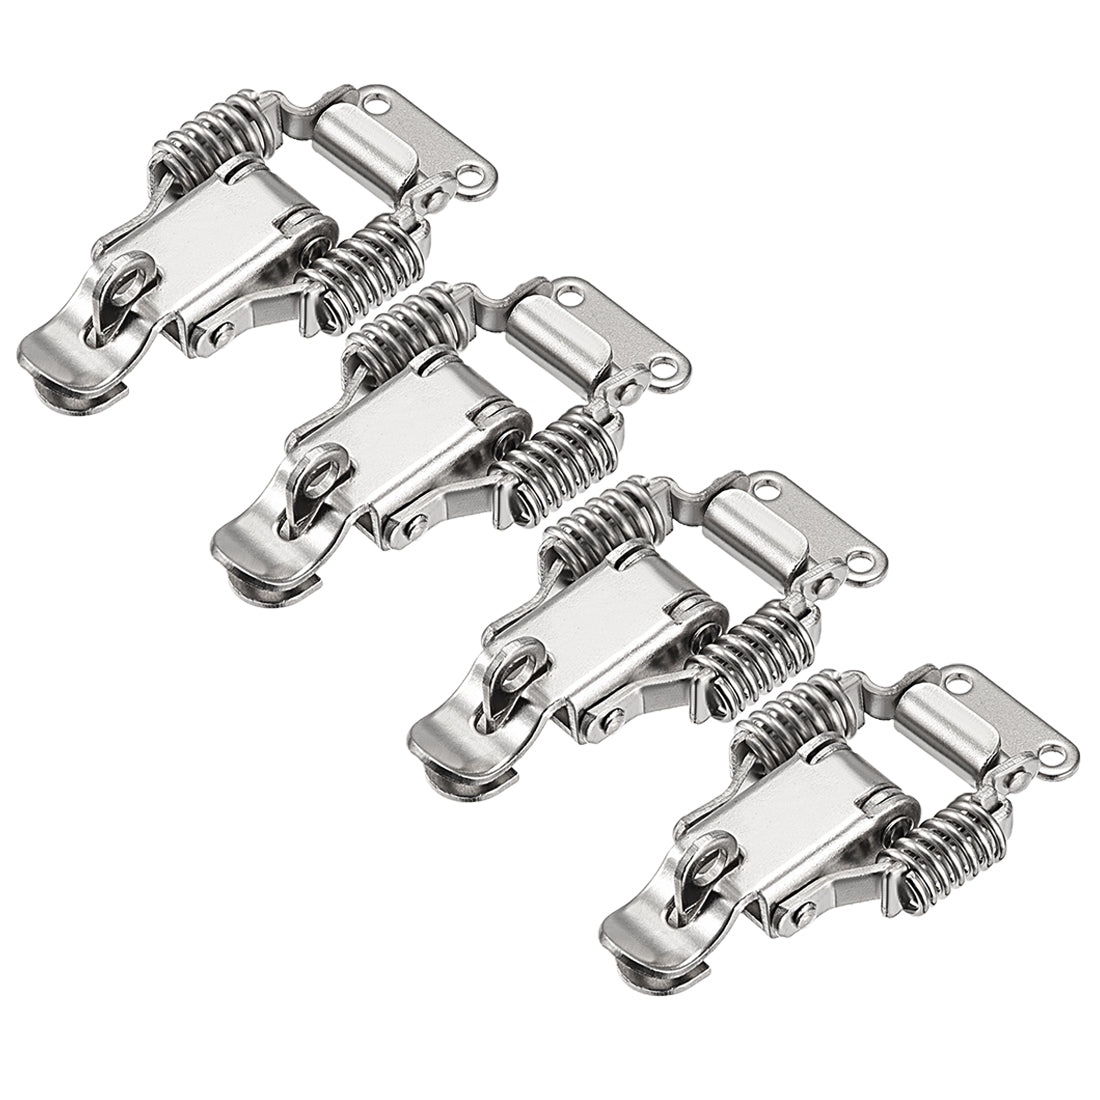 uxcell Uxcell 4pcs 304 Stainless Steel Spring Loaded Toggle Latch Catch Clamp 66mm